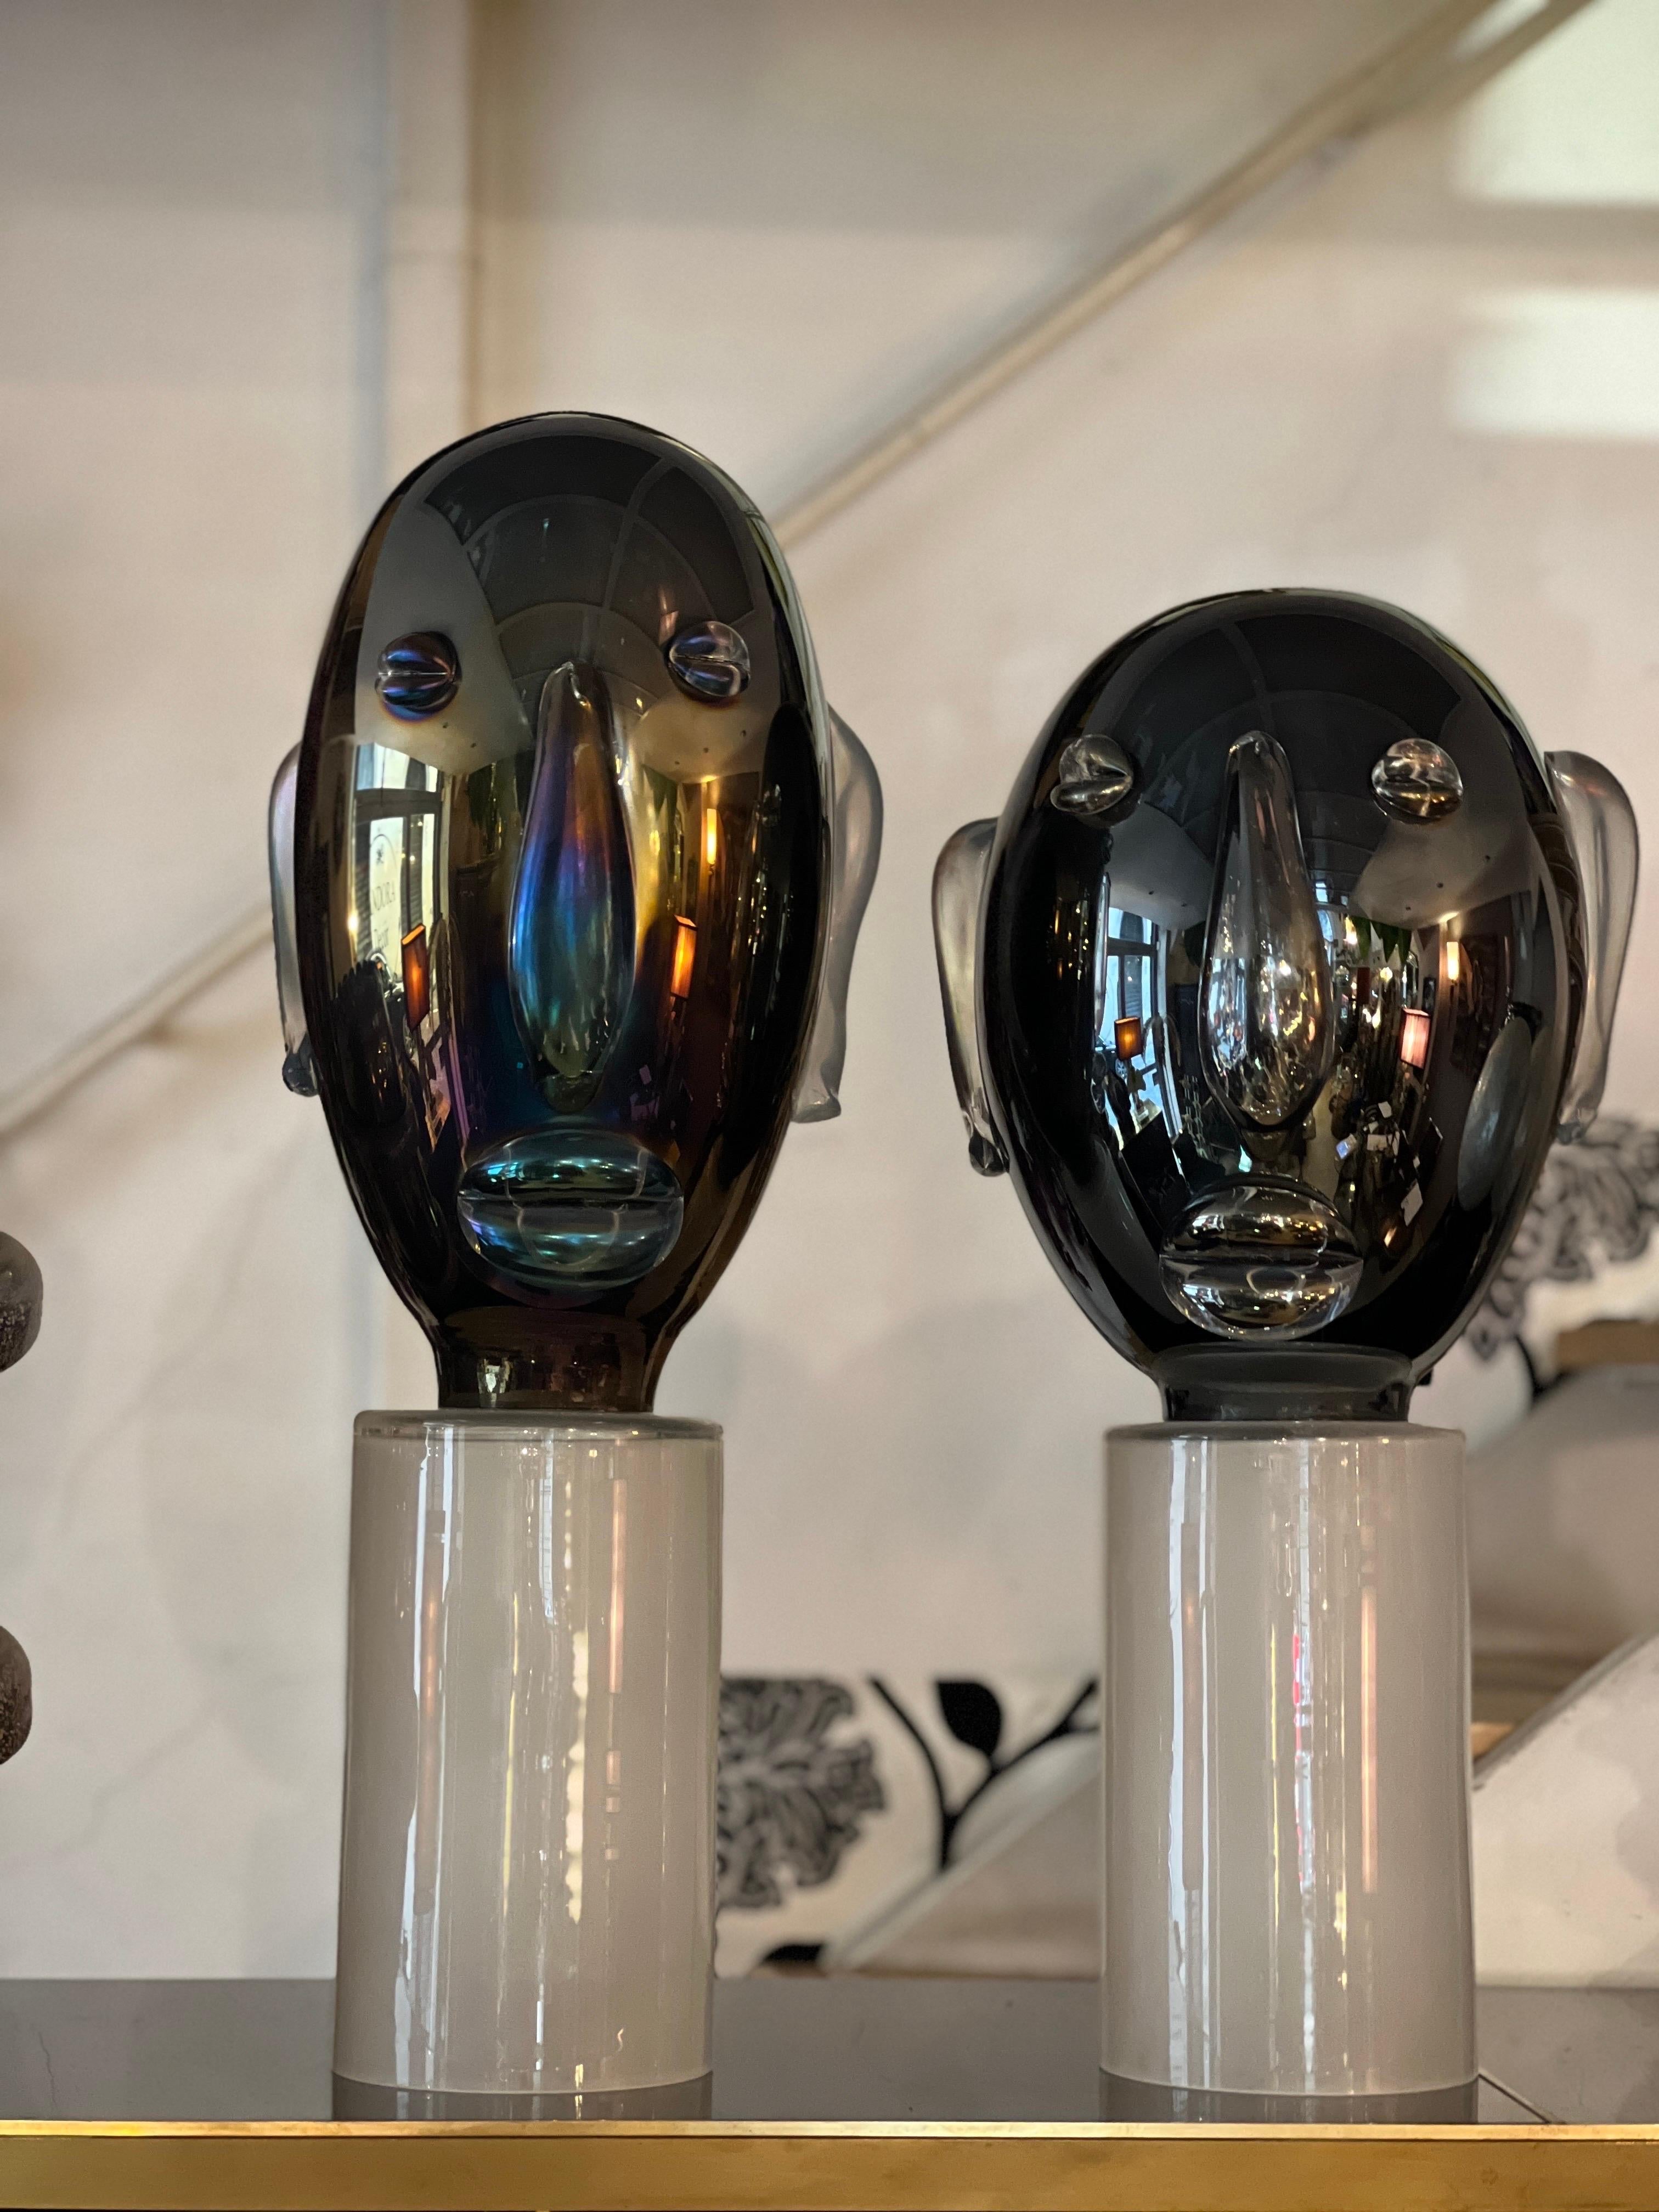 Pair of Modernist Murano glass sculptures head-shaped Picasso style on clear frosted glass round base. The elongated head is made of black mirrored and iridescent Murano Glass. The applications (mouth, ears, nose and eyes) are made of handblown